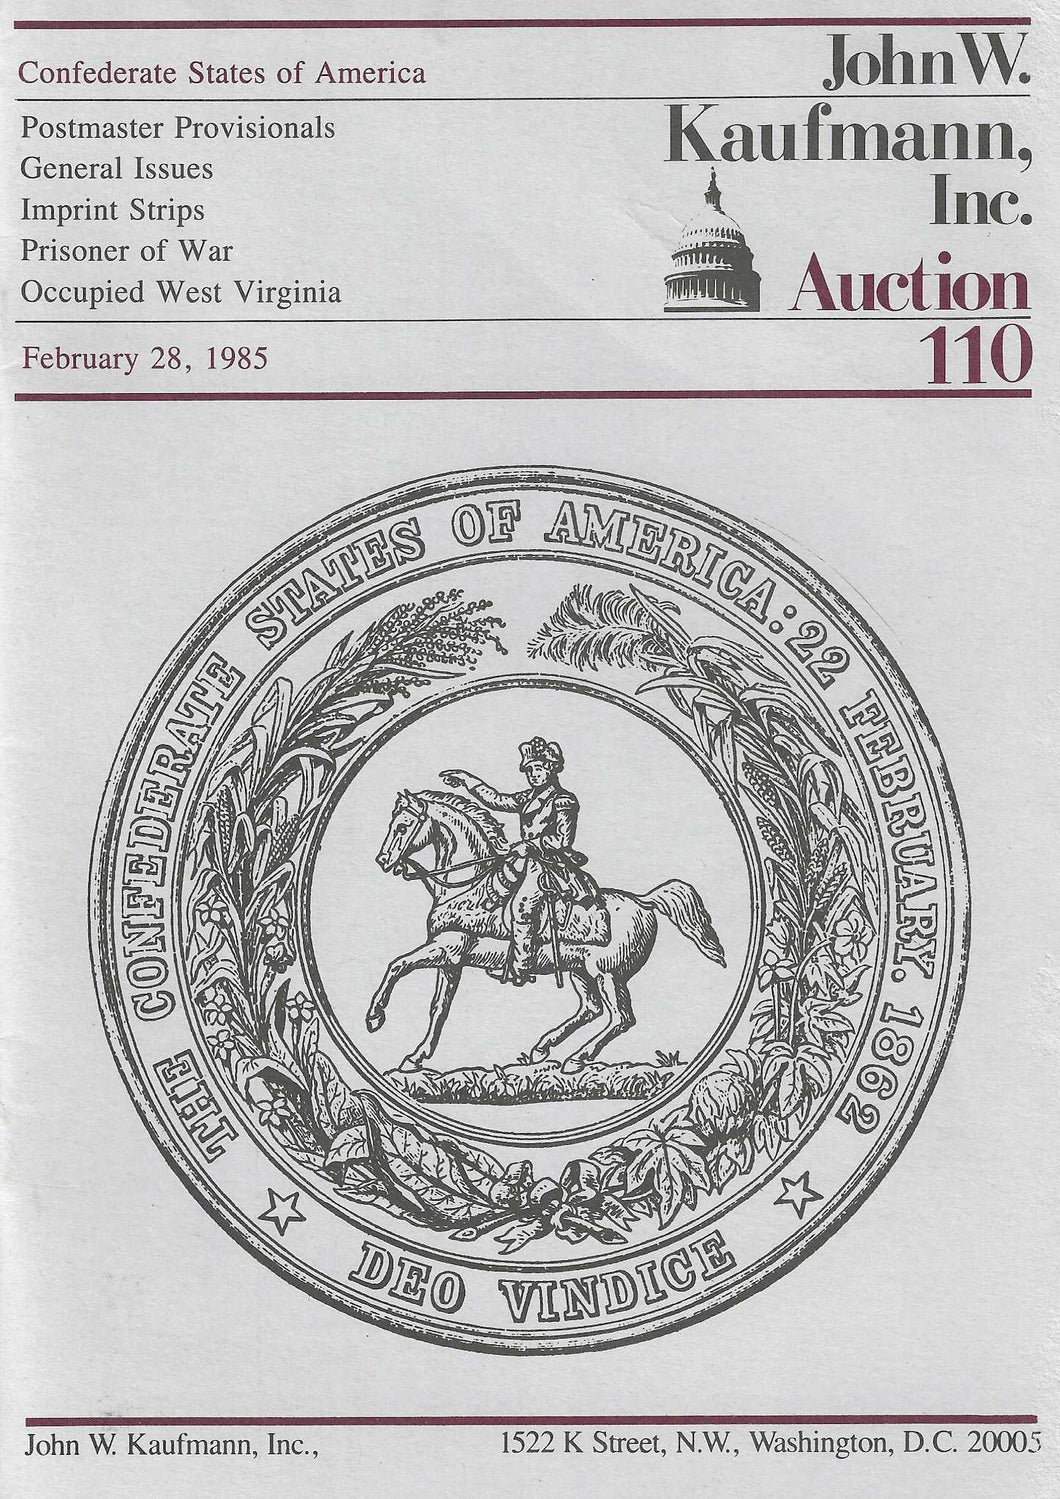 Confederate Of America, Including: Postmasters Provisionals and General Issues, John W. Kaufmann Inc., Sale 110, Feb. 28, 1985